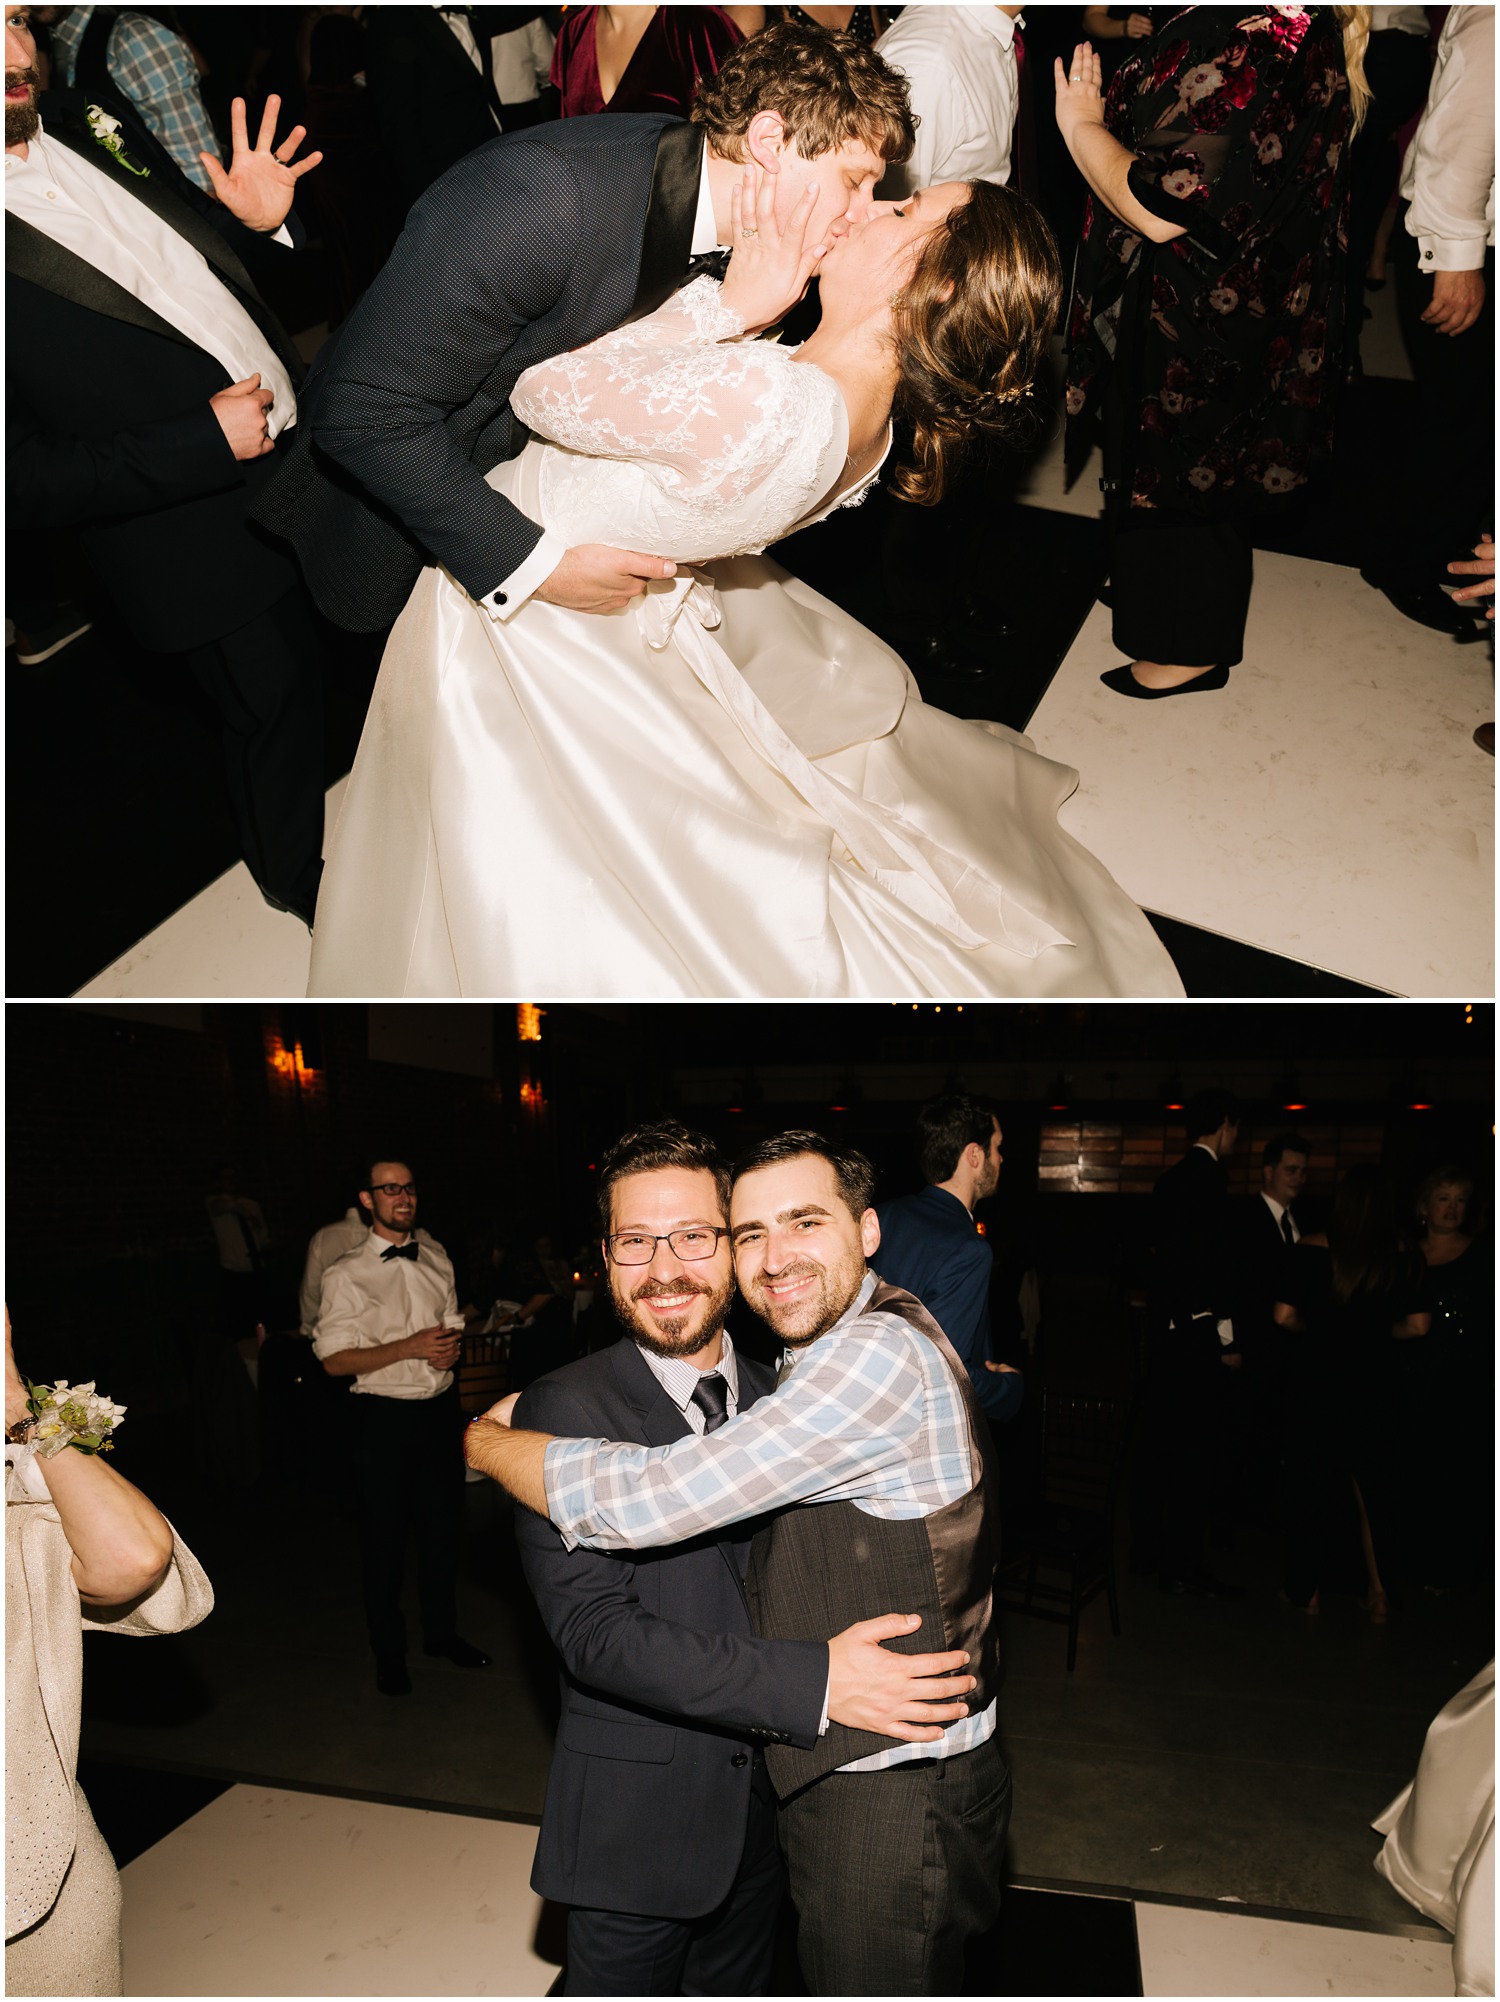 guests and bride and groom enjoy NC wedding reception photographed by Chelsea Renay Photography